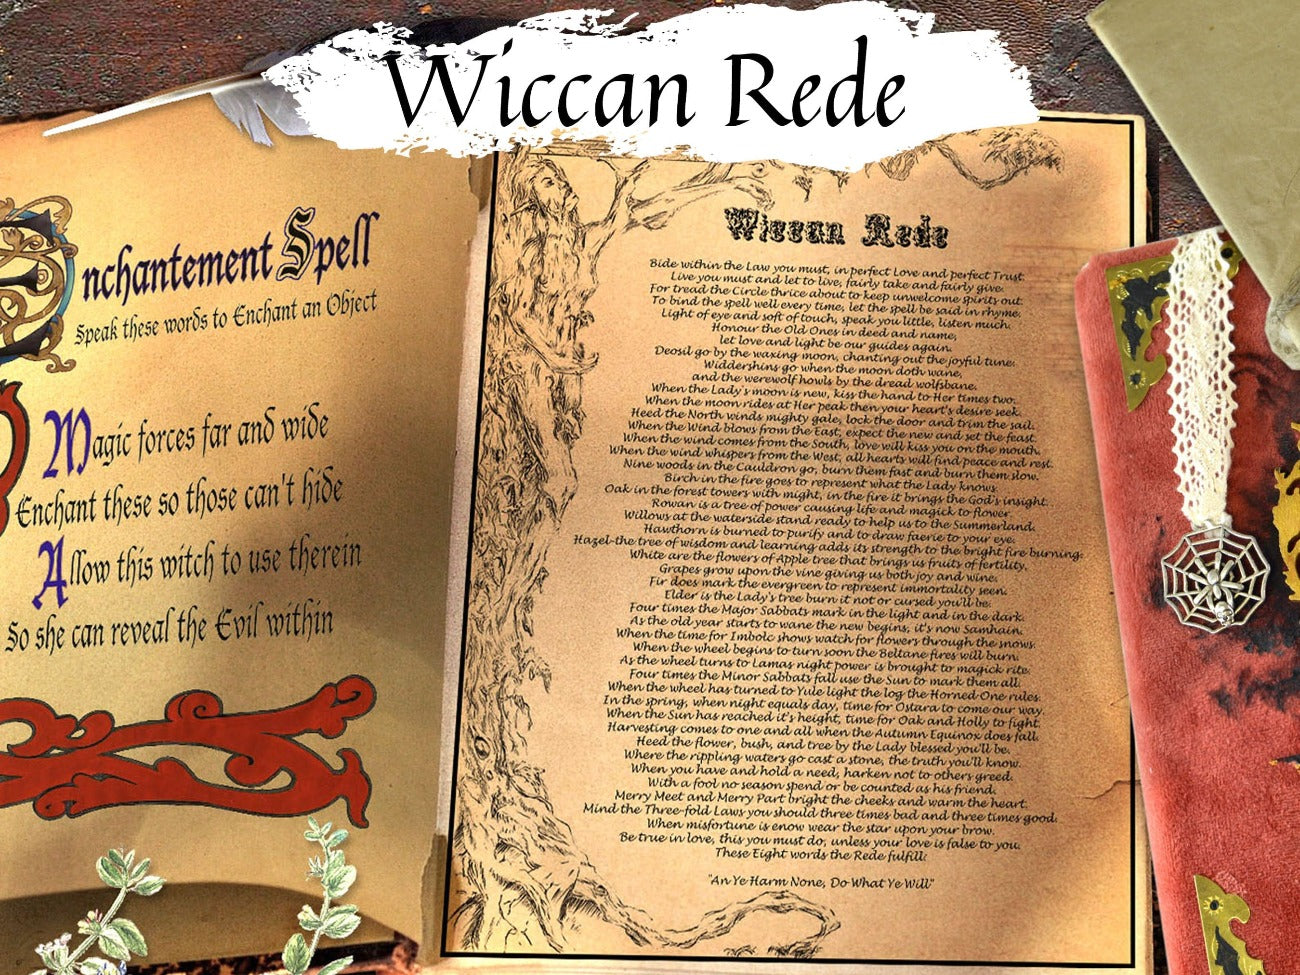 WICCAN REDE, Laws of Wicca, Wiccan Creed, An Harm Ye None, Wicca Witchcraft Magic Threefold Law, Witchs Creed, Do What you Will, Printable - Morgana Magick Spell